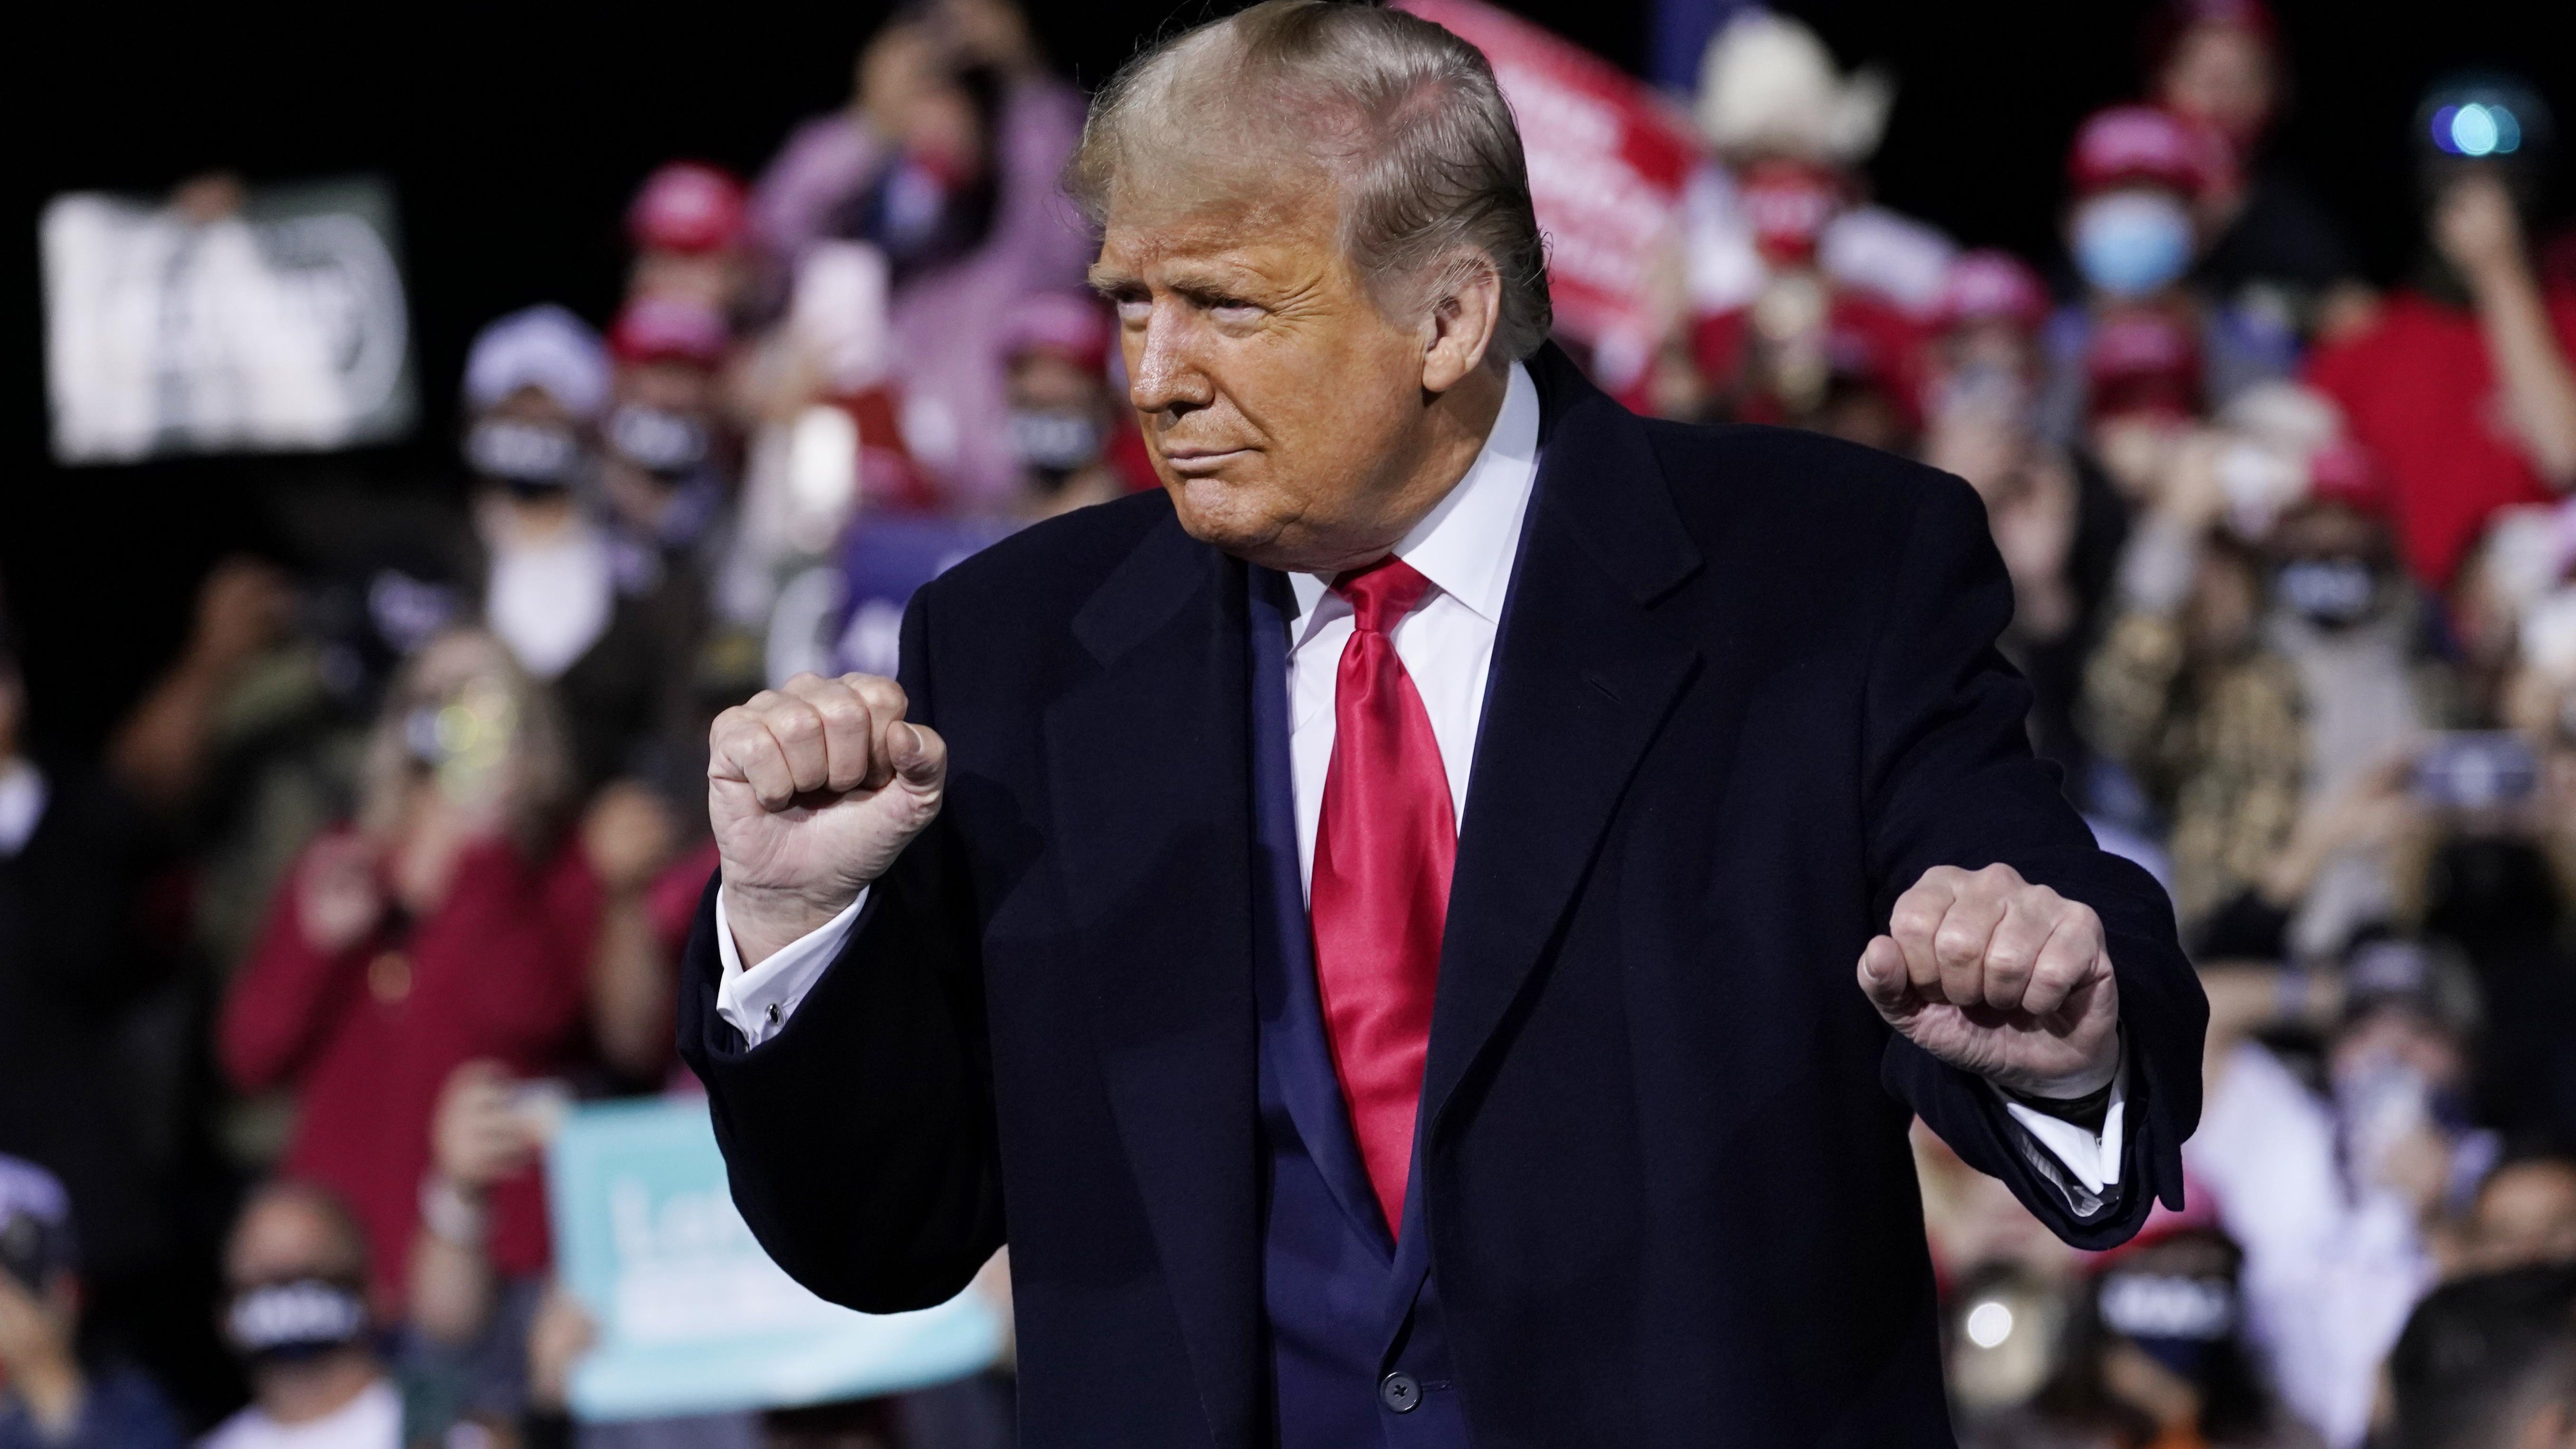 President Donald Trump, shown here at a campaign rally in Fayetteville, North Carolina, on Saturday, is relying on white evangelicals to help him claim Pennsylvania on Nov. 3.